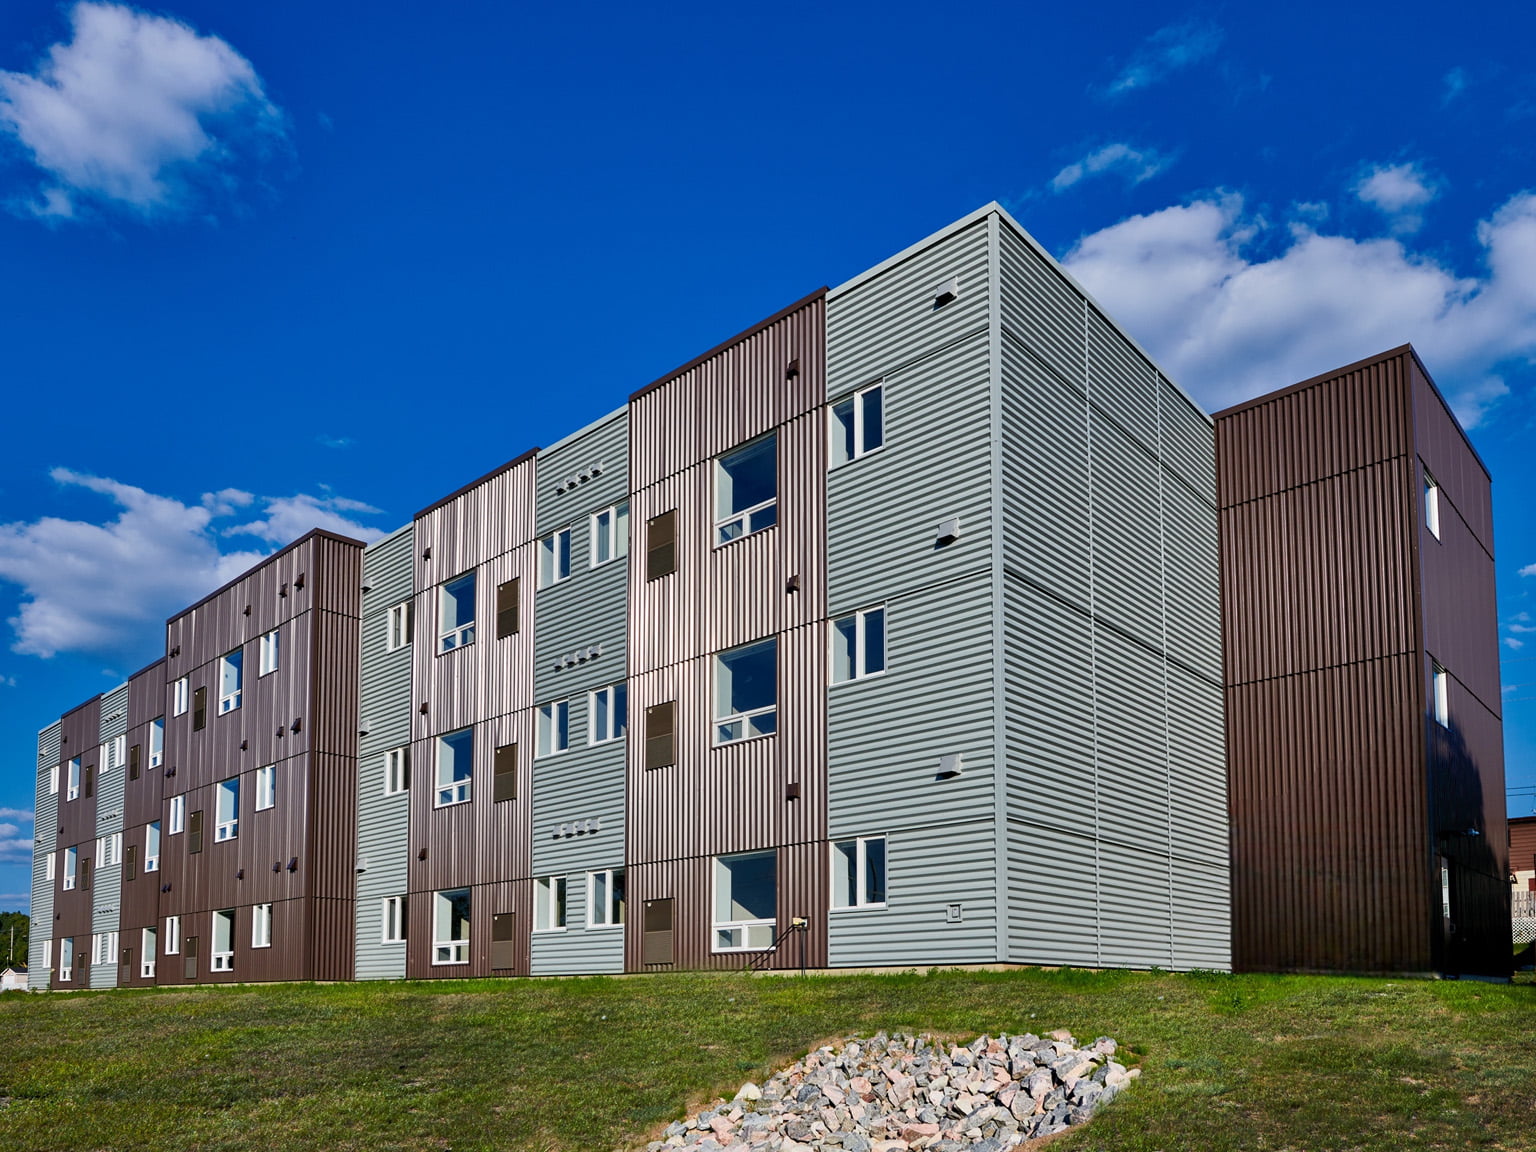 1 McLeod Drive Apartments comprises 30 units, all featuring two-bedroom suites